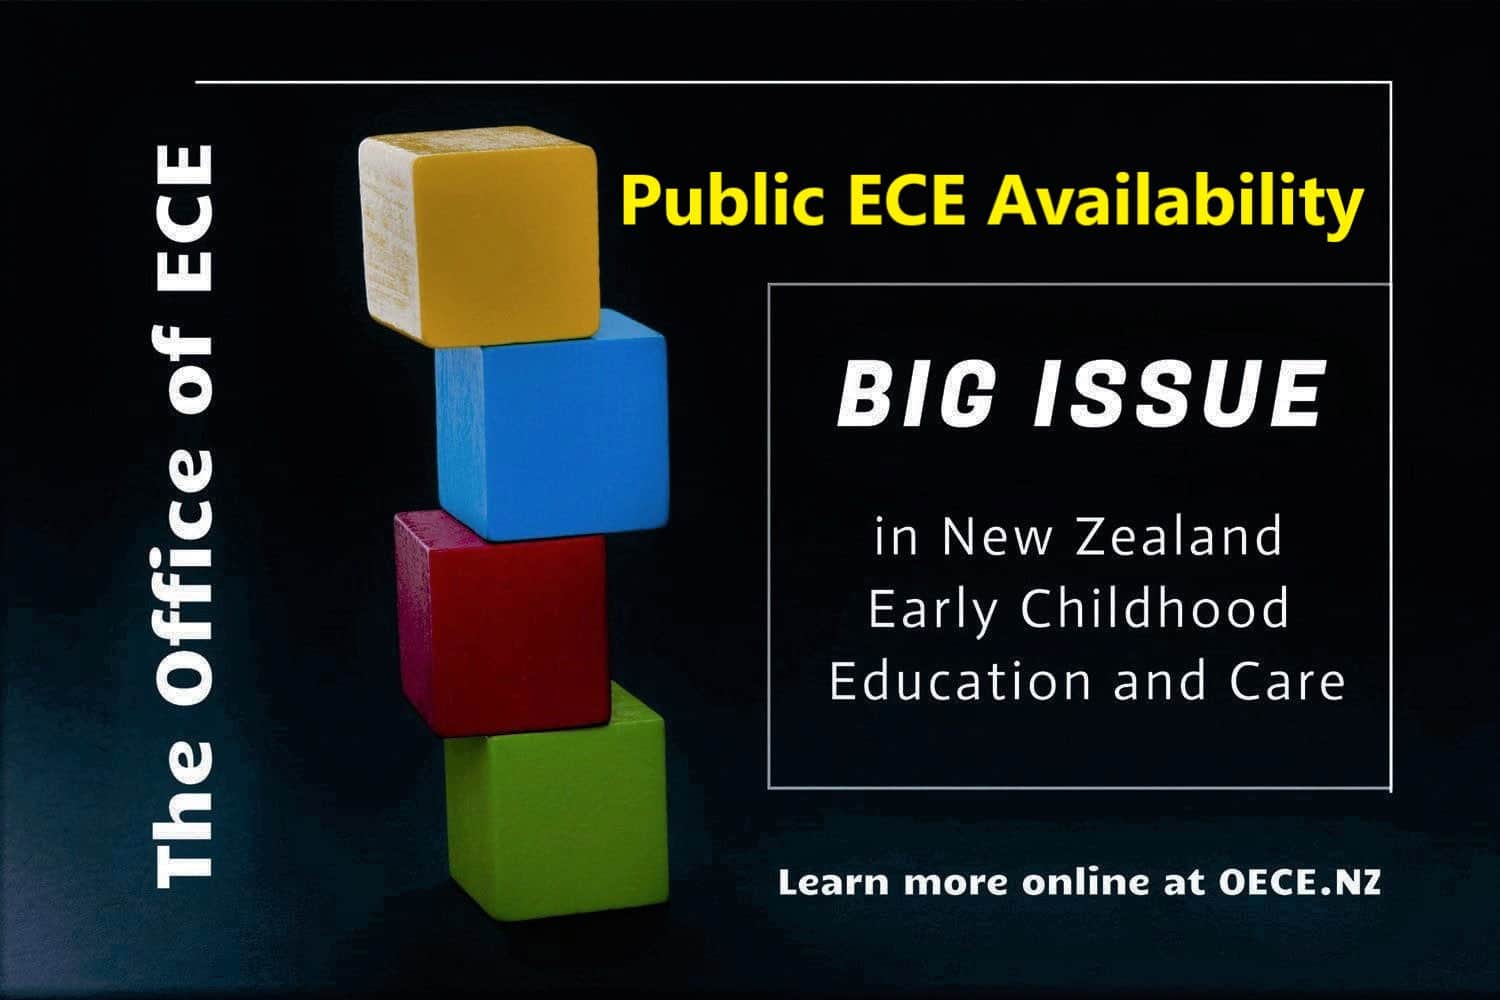 Provision of Public Early Childhood Education and Childcare